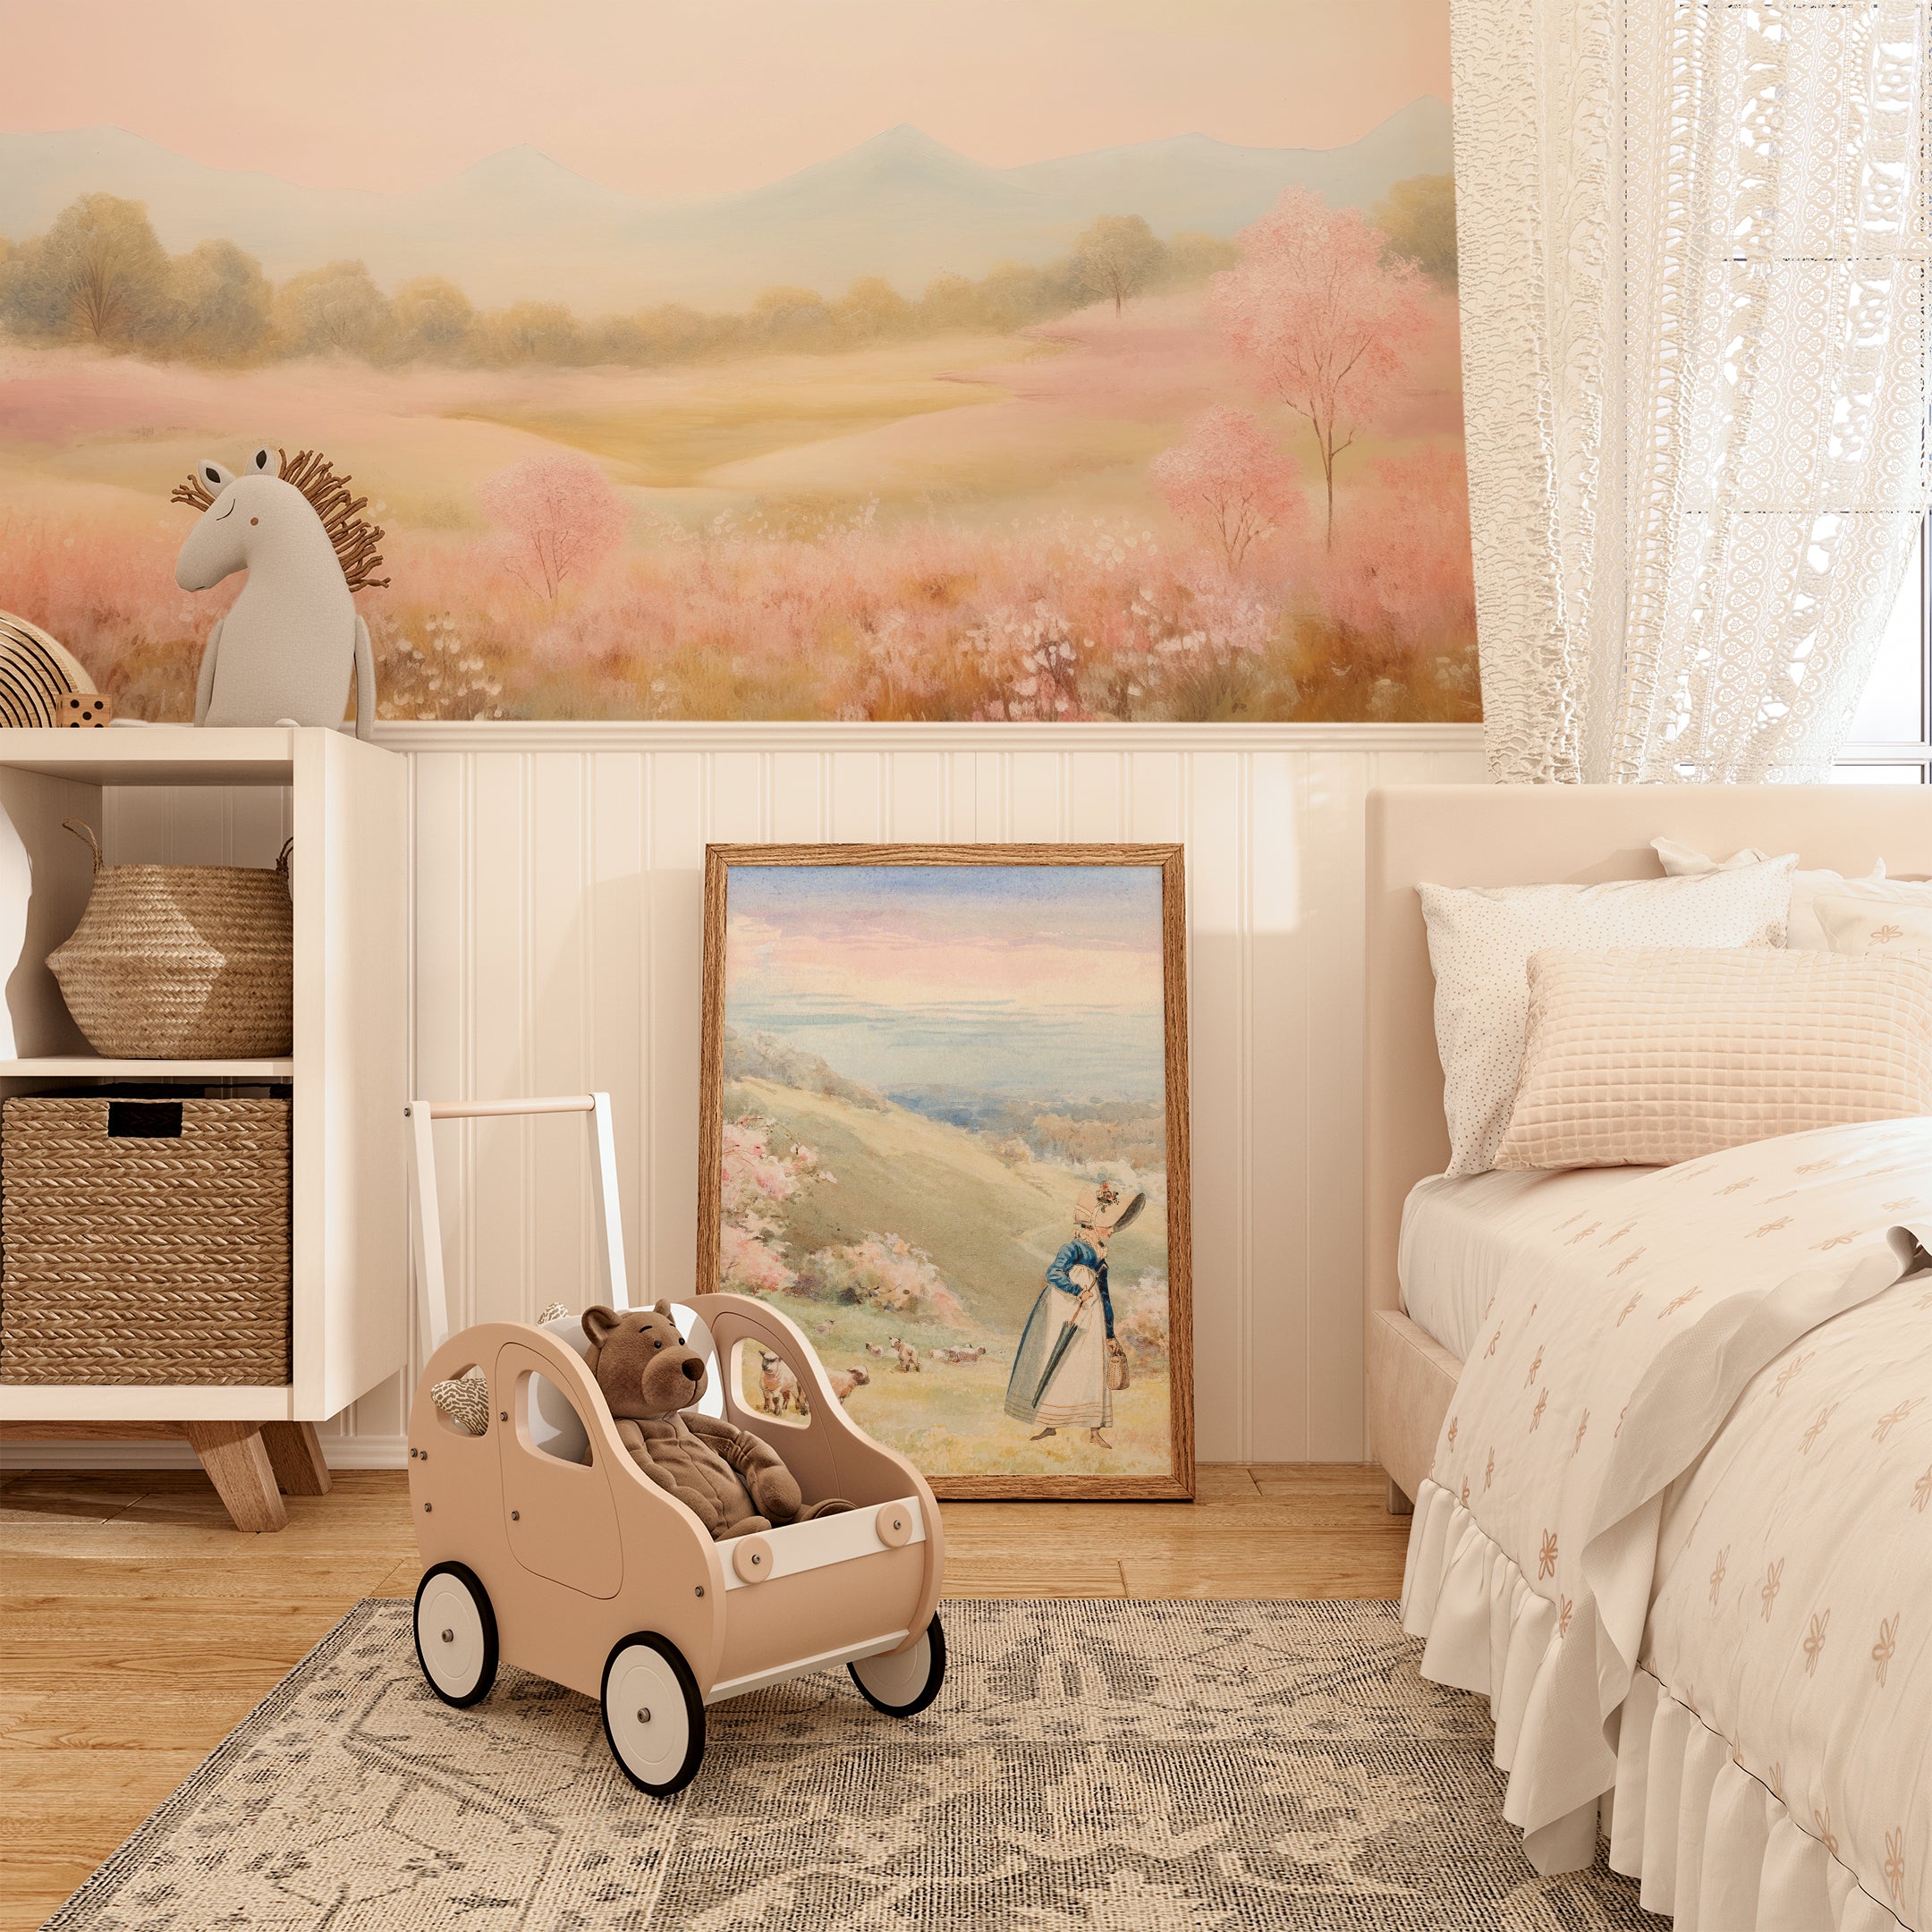 Bedroom installation of the Spring Valley mural showcasing a tranquil springtime scene with soft pastels and floral elements.